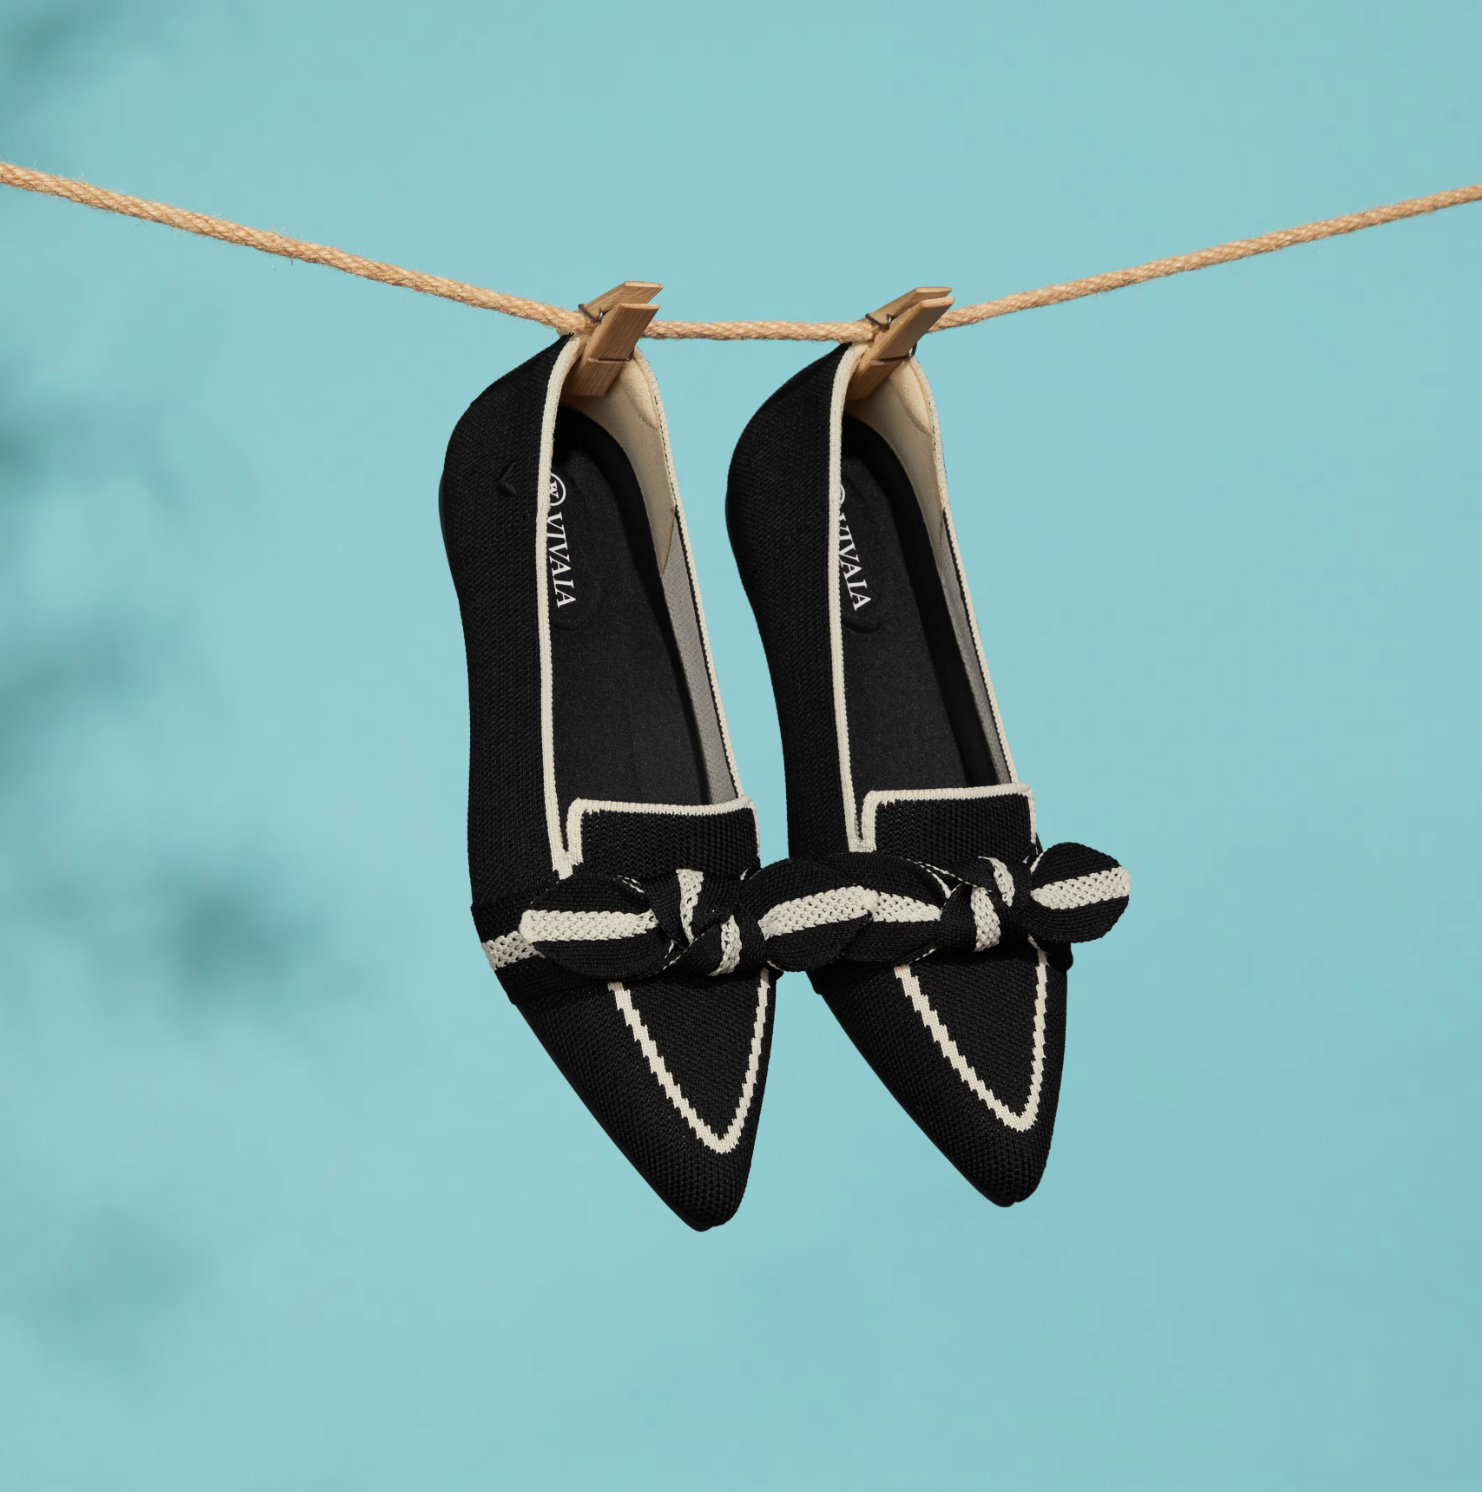 A pair of Vivaia sustainable loafers hanging on a clothesline.